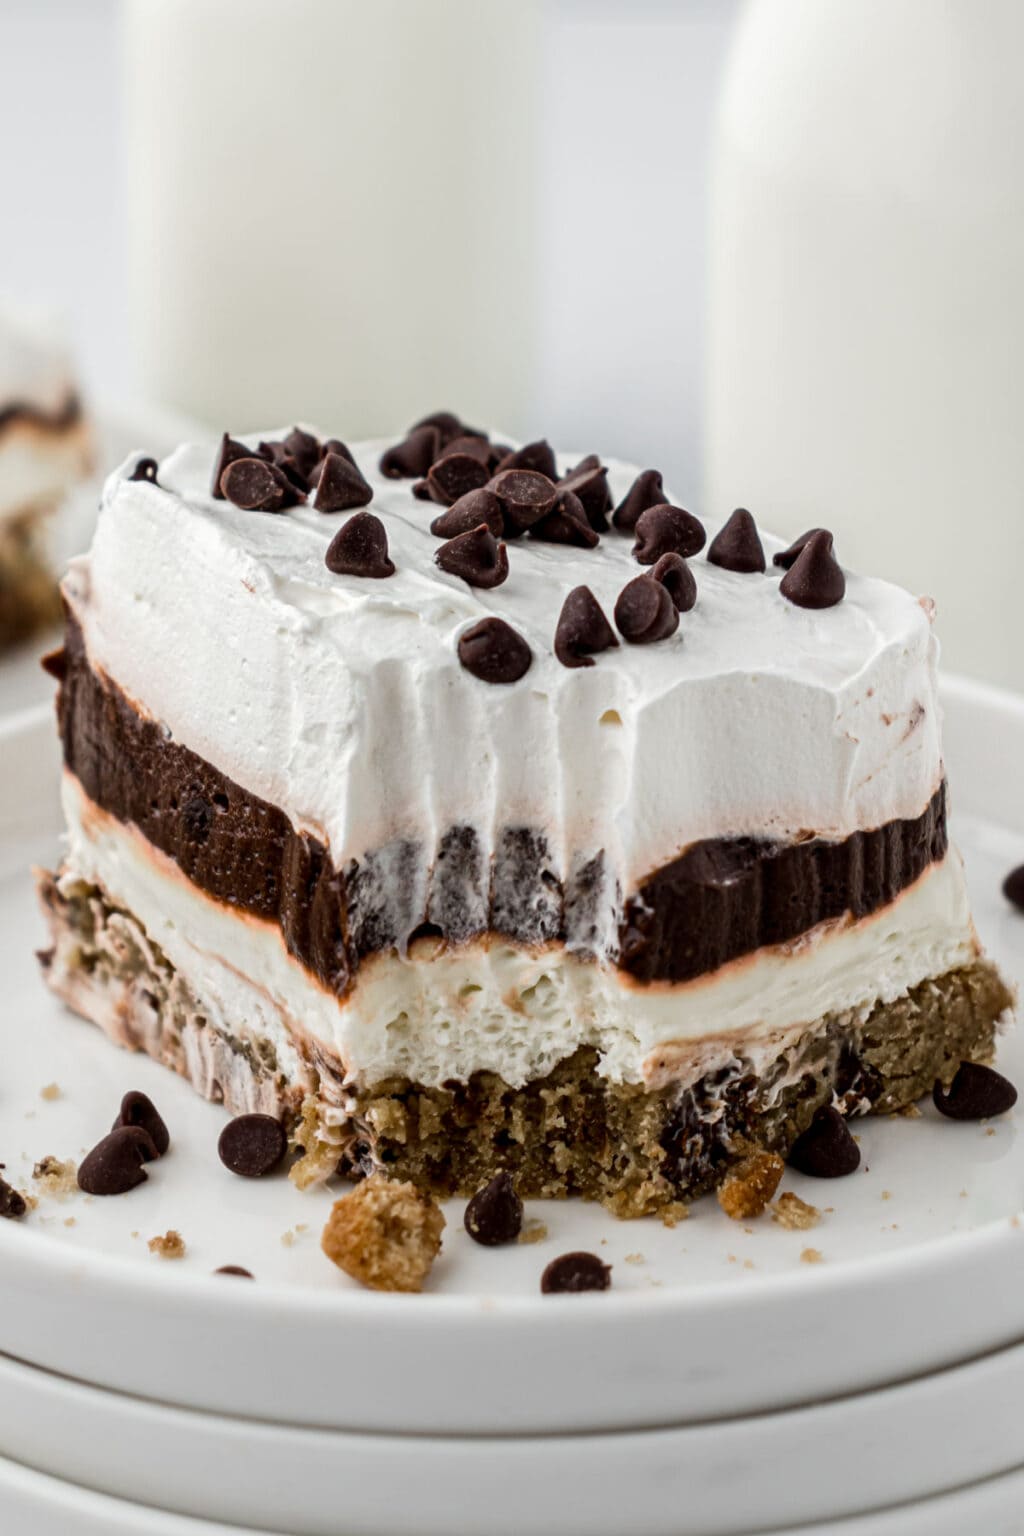 Chocolate Chip Cookie Delight (Layered Dessert) - Restless Chipotle